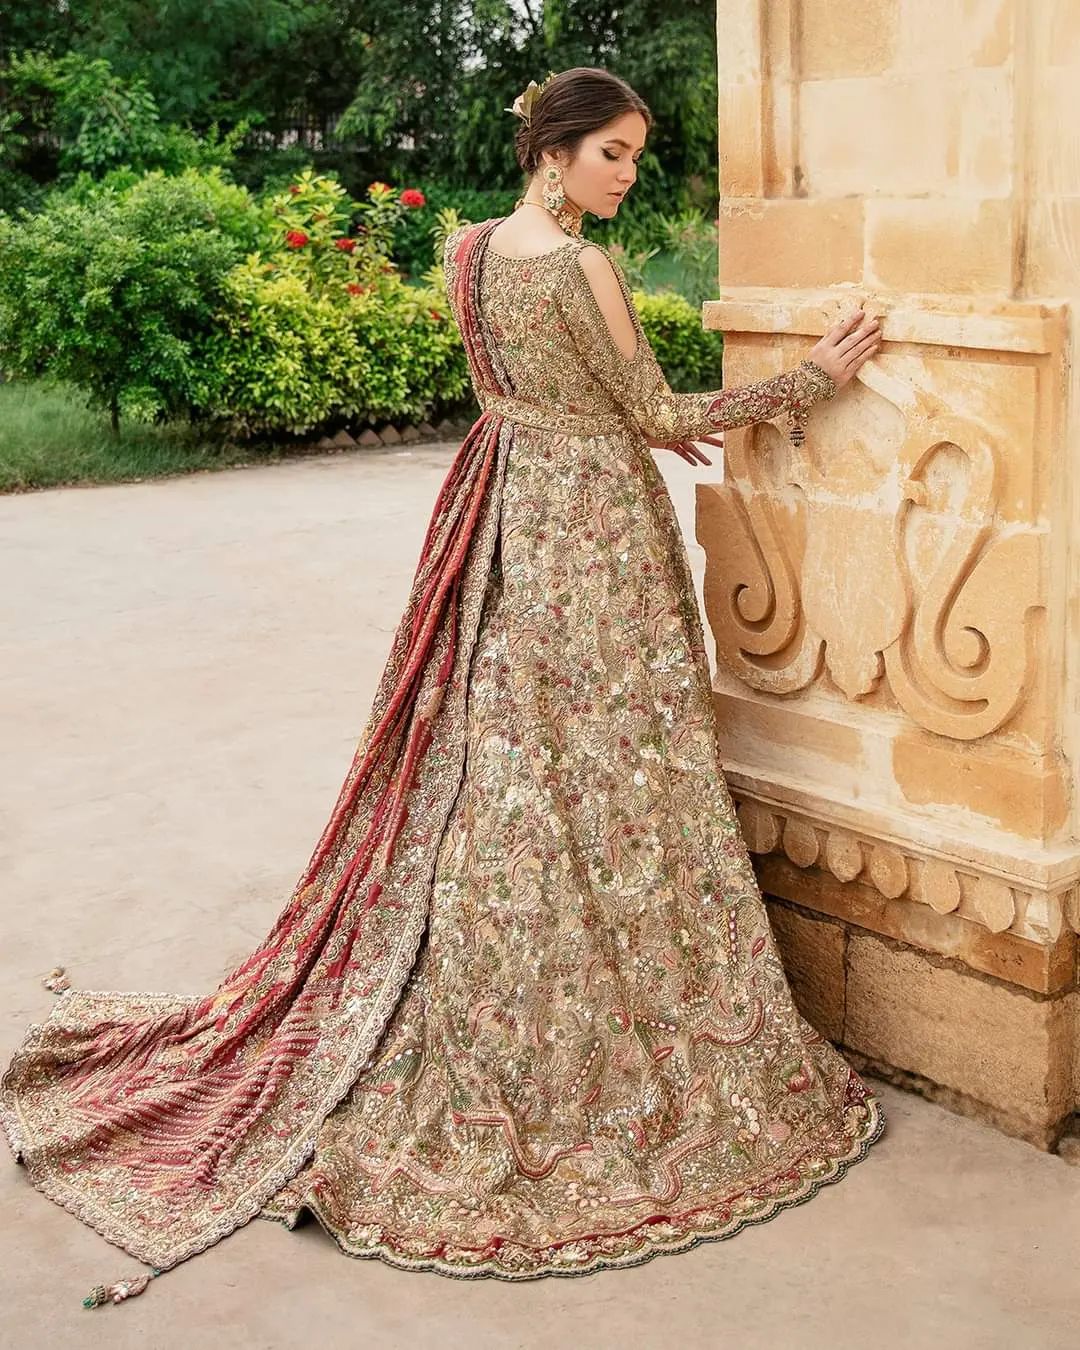 Silvery Fawn Bridal Lehenga in Pleated Organza-Tissue With Spaghetti  Sleeved Choli And Heavily Embellished Princess Cut Jacket in  Sequins-Salli-Pearl and Net Dupatta - Aara Couture